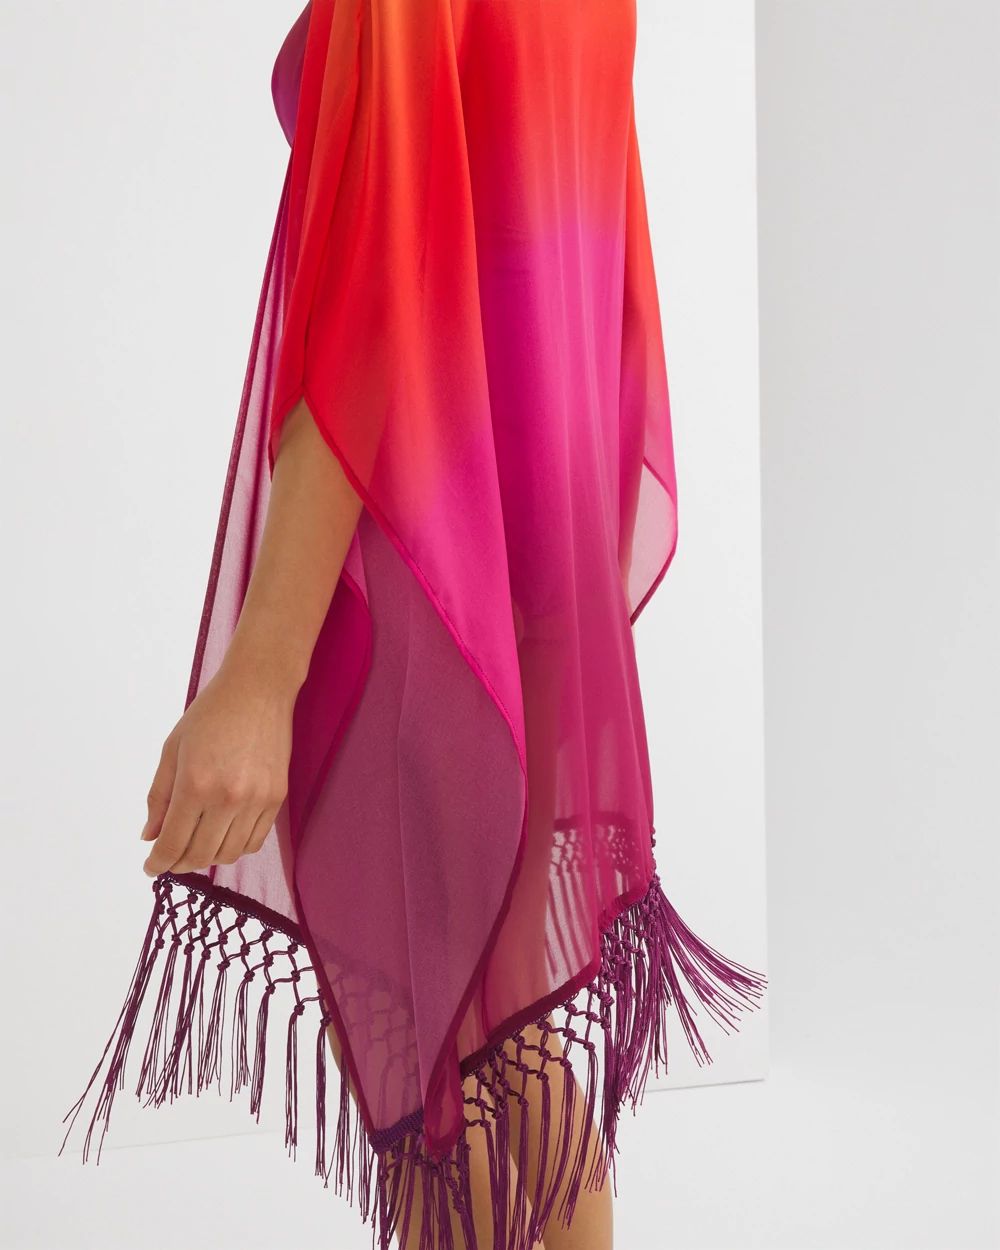 Fringe Swim Cover Up click to view larger image.